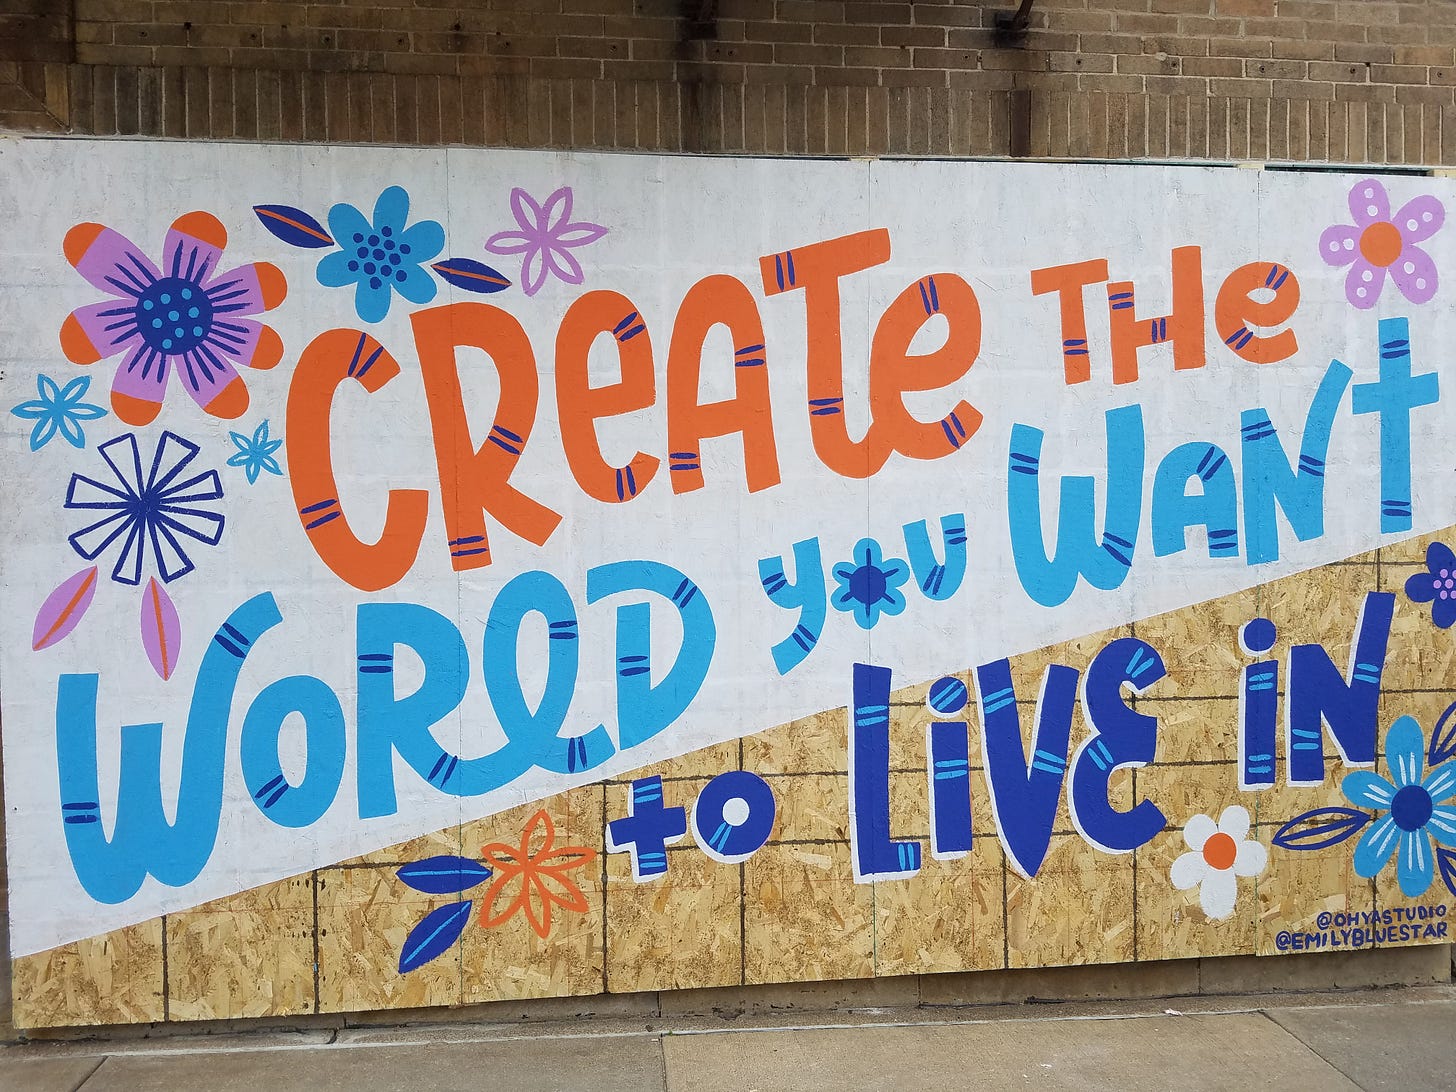 A brightly colored mural painted on plywood reads "Crate the world you want to live in."